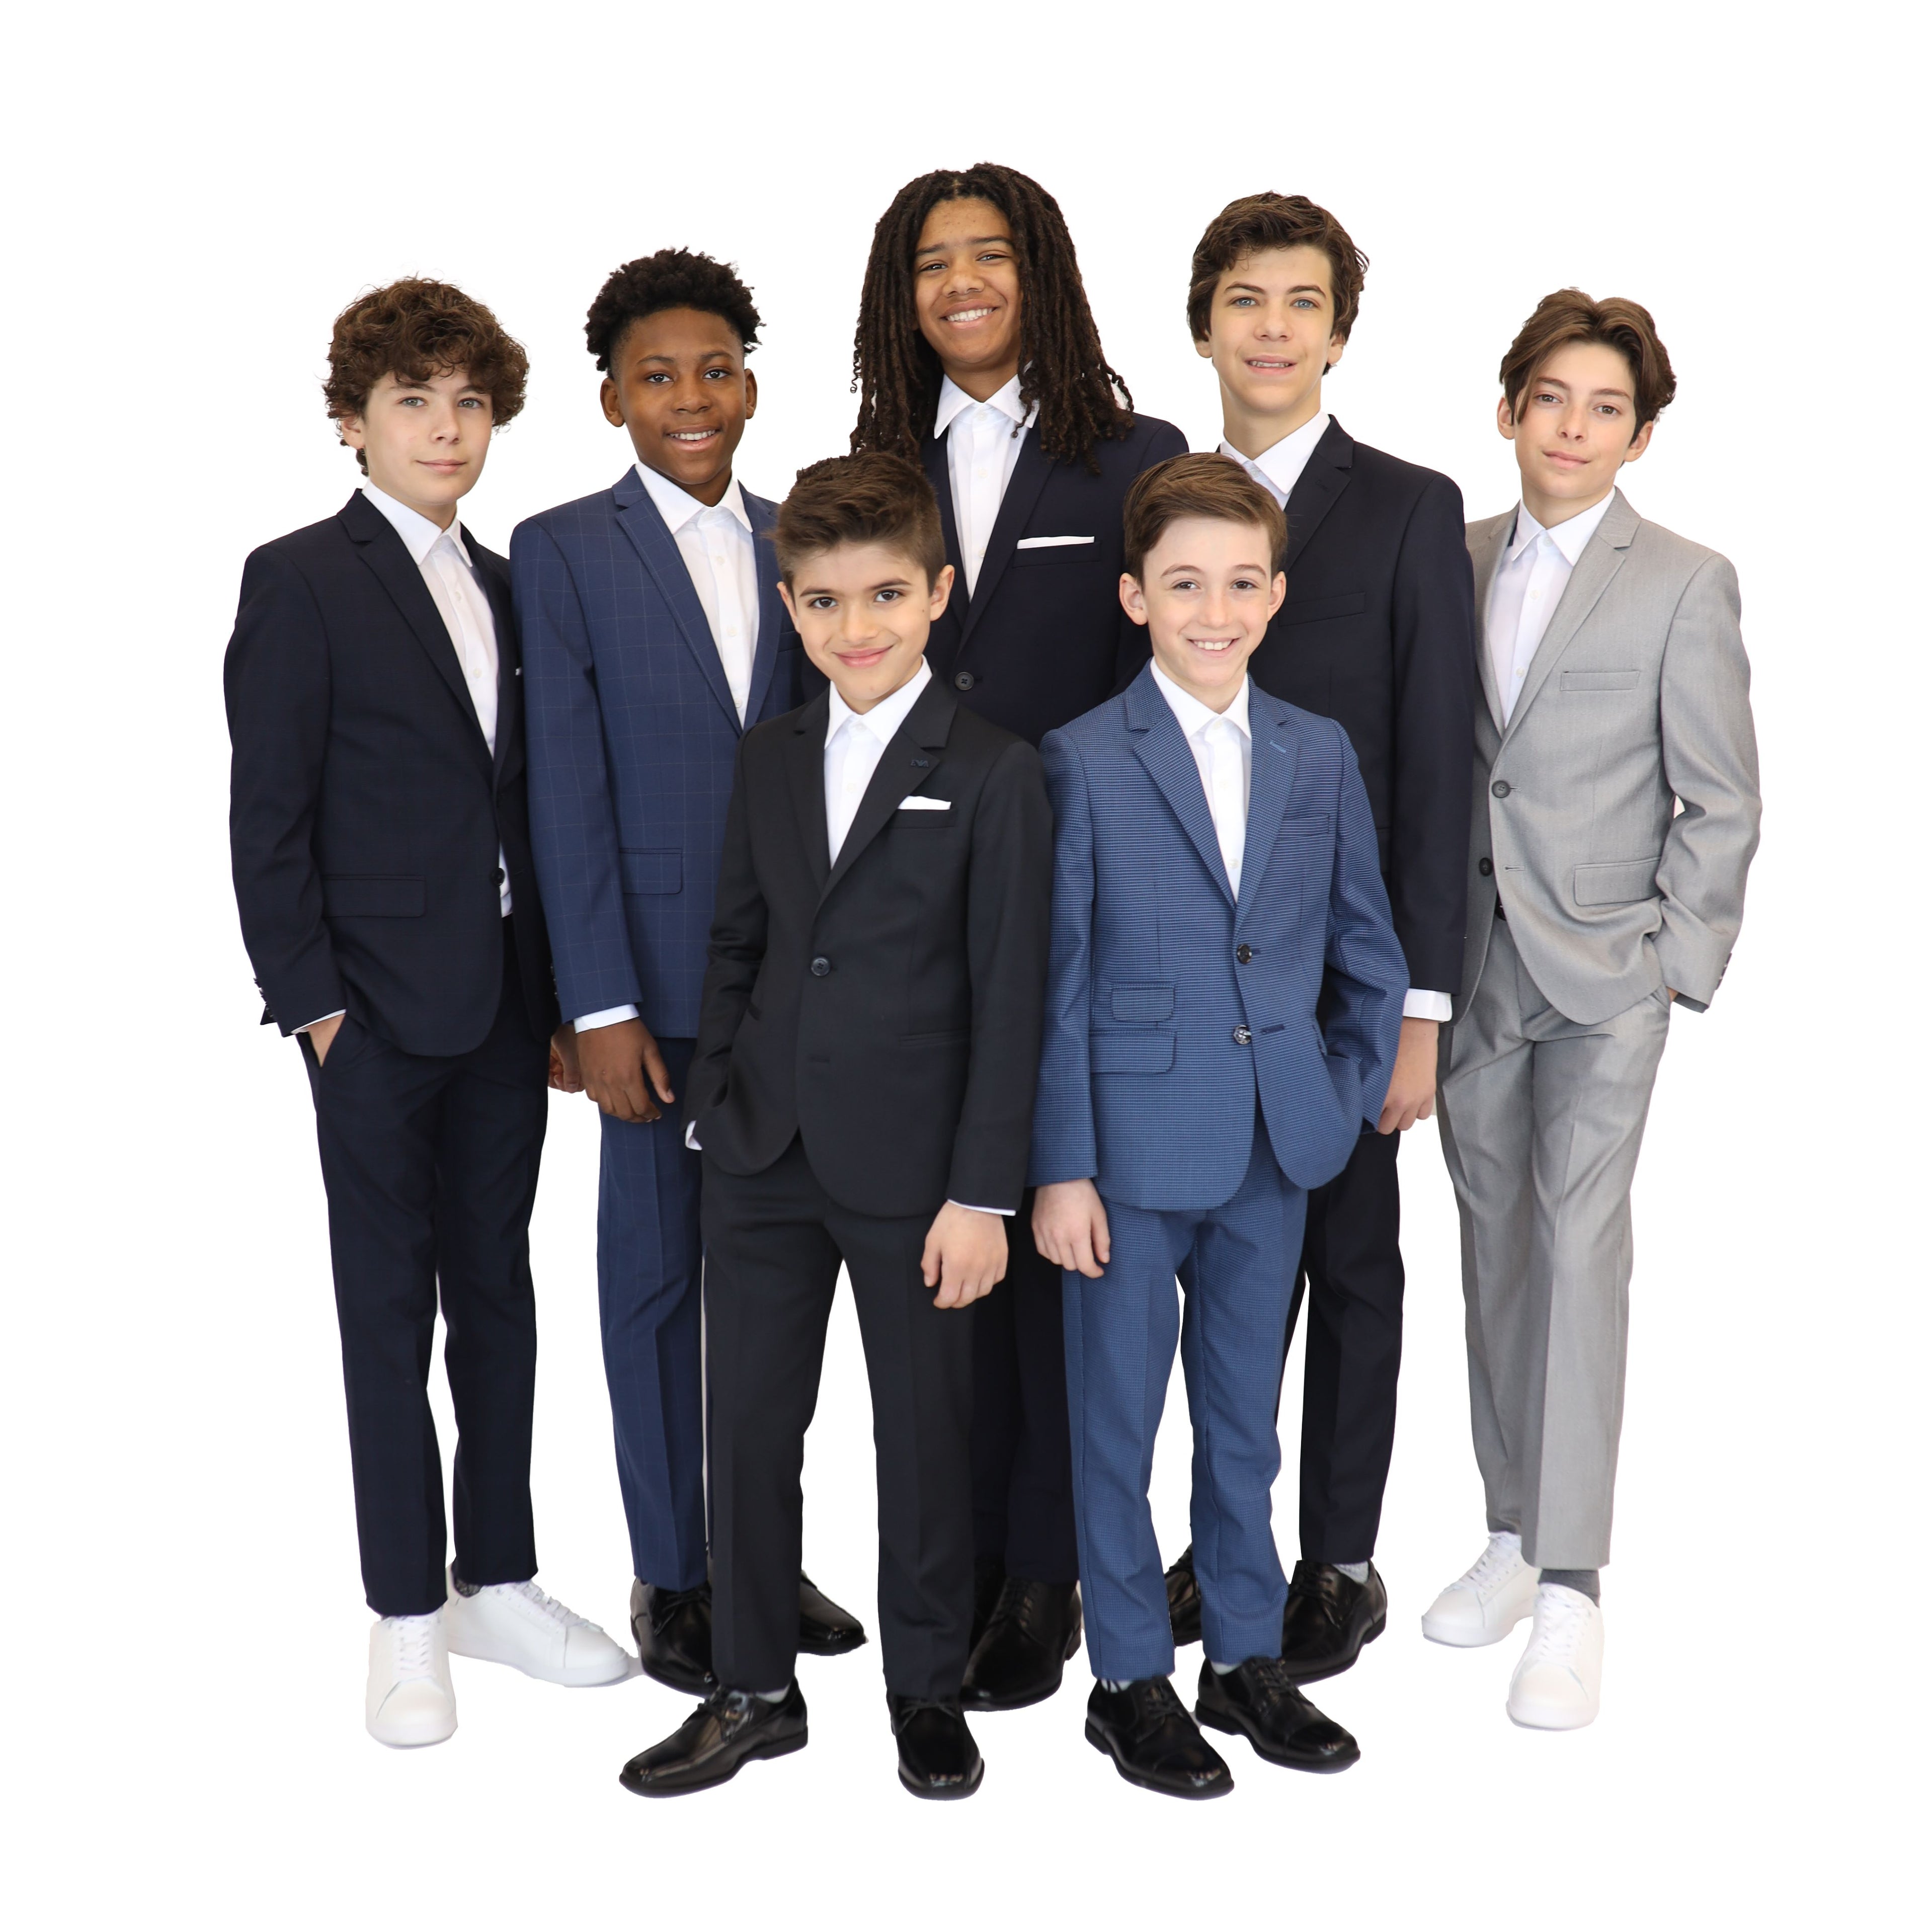 Boys in formal suits for bar mitzvah, communion, confirmation